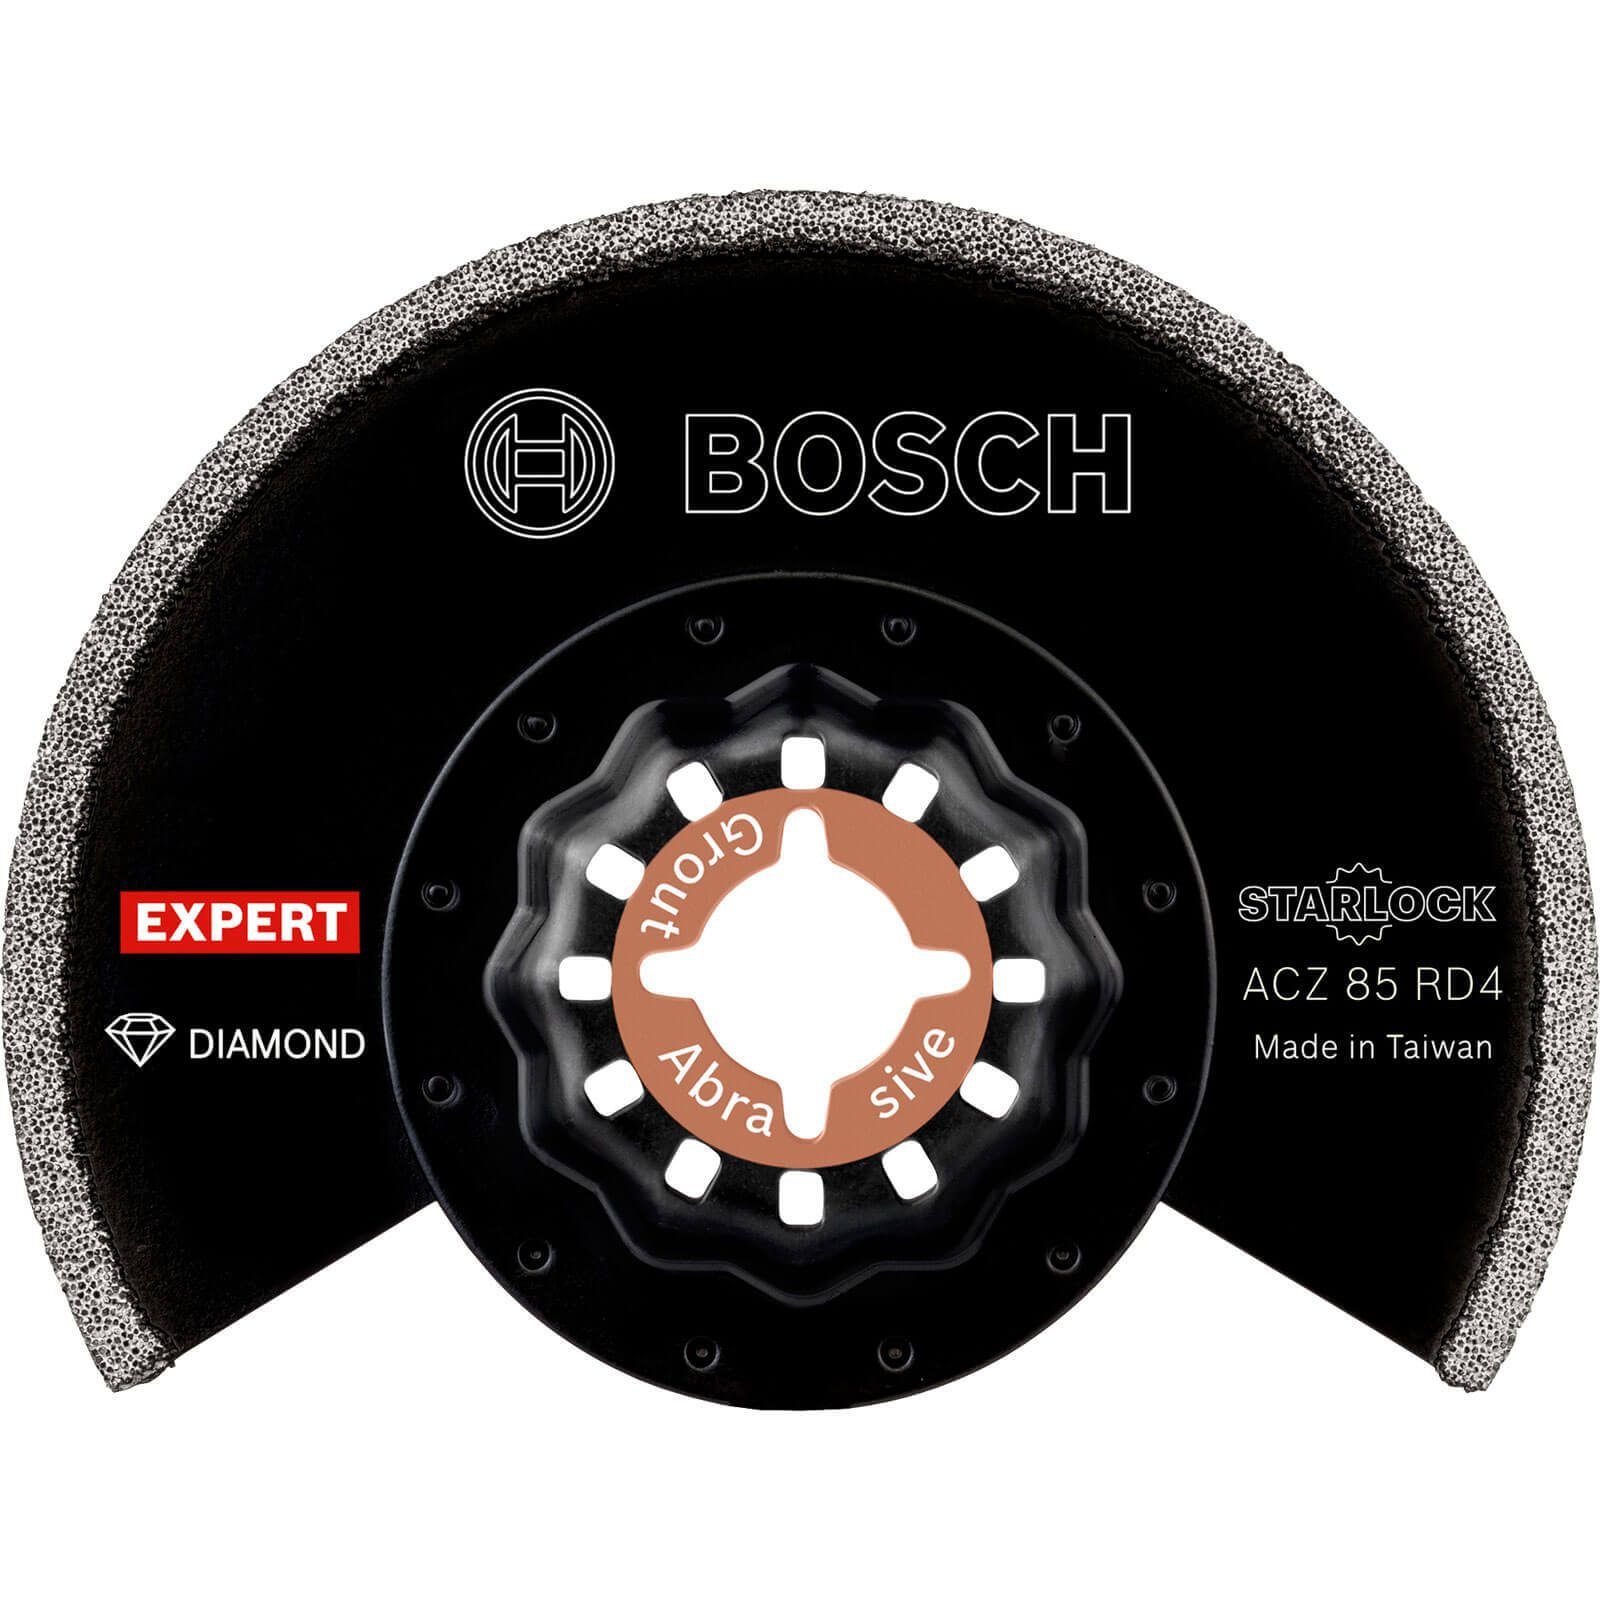 Image of Bosch Expert ACZ 85 RD4 Abrasive and Grout Oscillating Multi Tool Segment Saw Blade 85mm Pack of 1